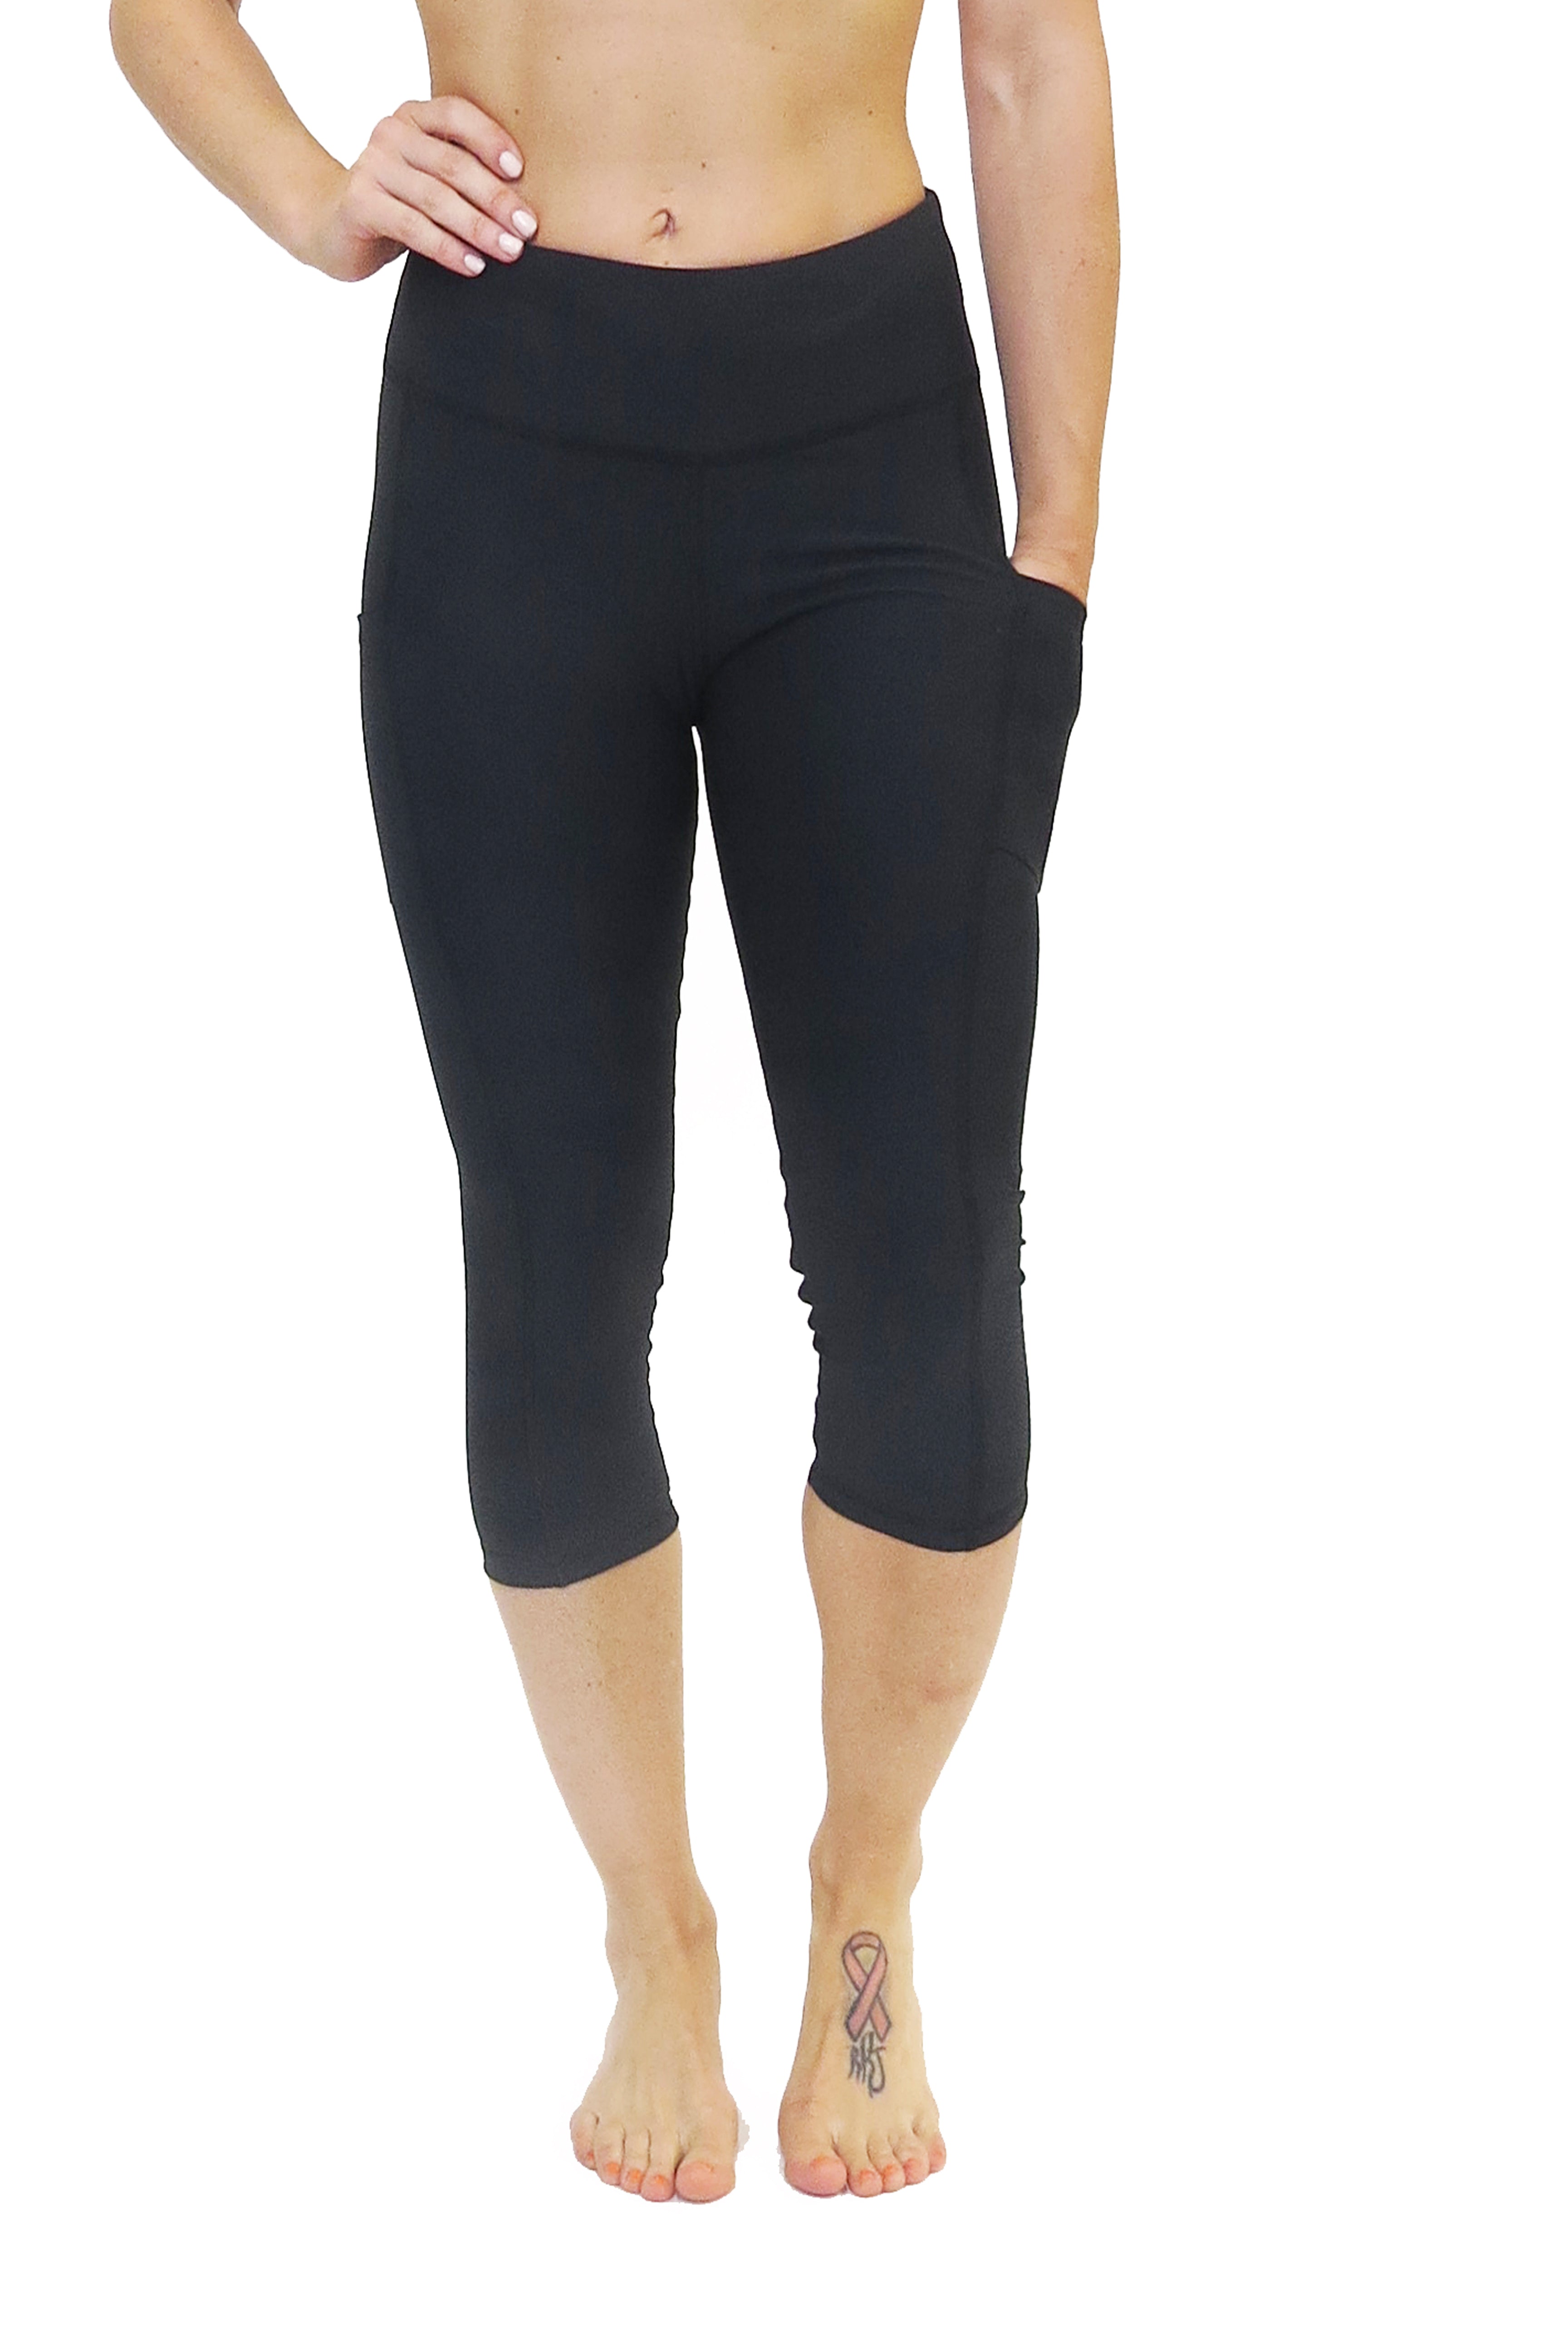 NEW YOUNG Capri Leggings with Pockets for Women High India | Ubuy